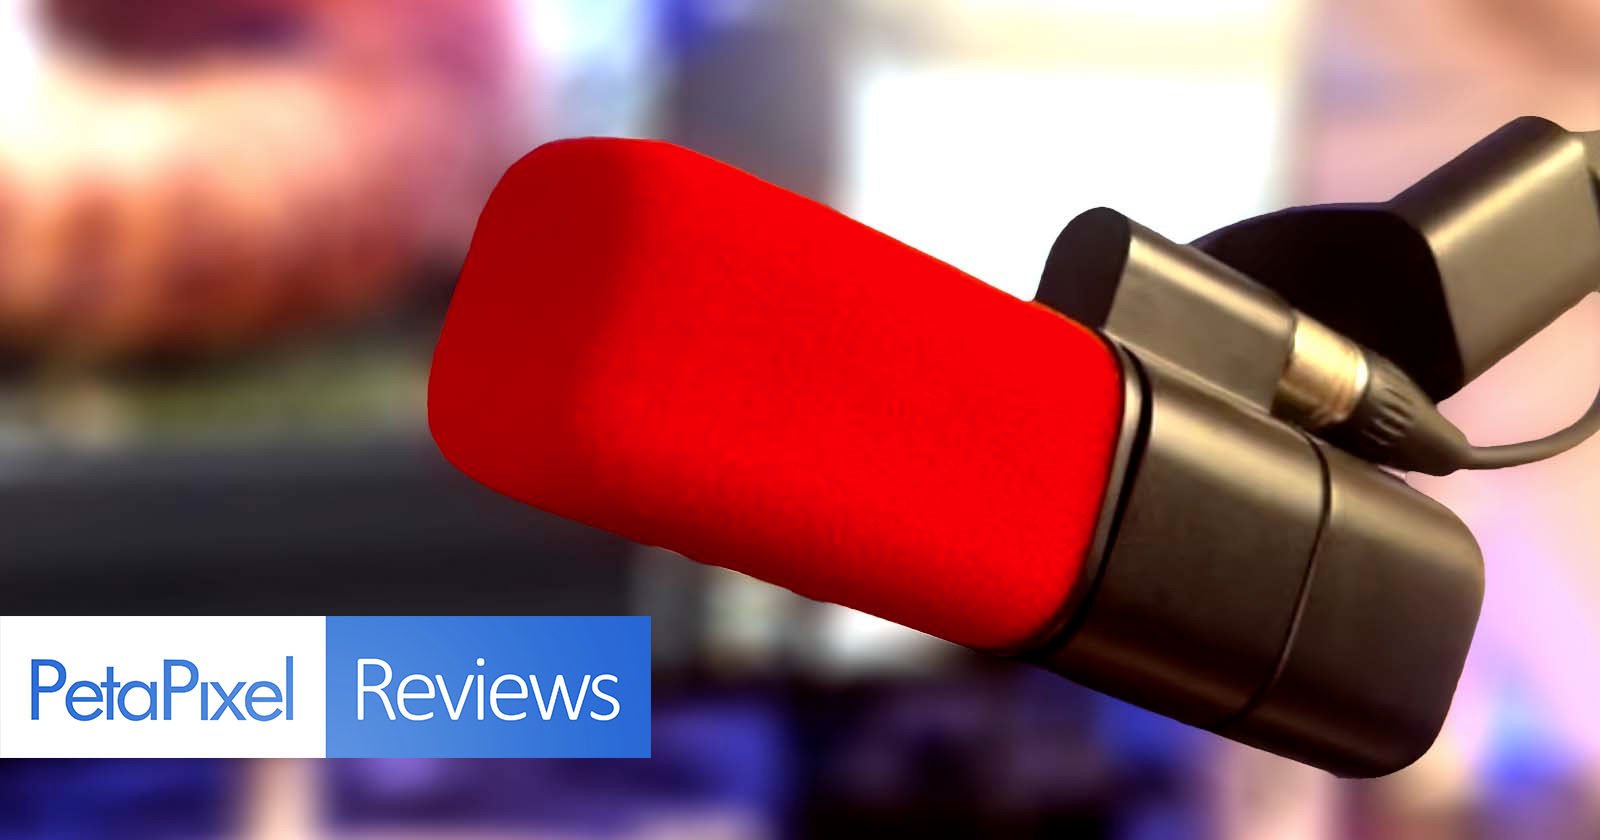 Logitech Blue Sona microphone review: Style and substance